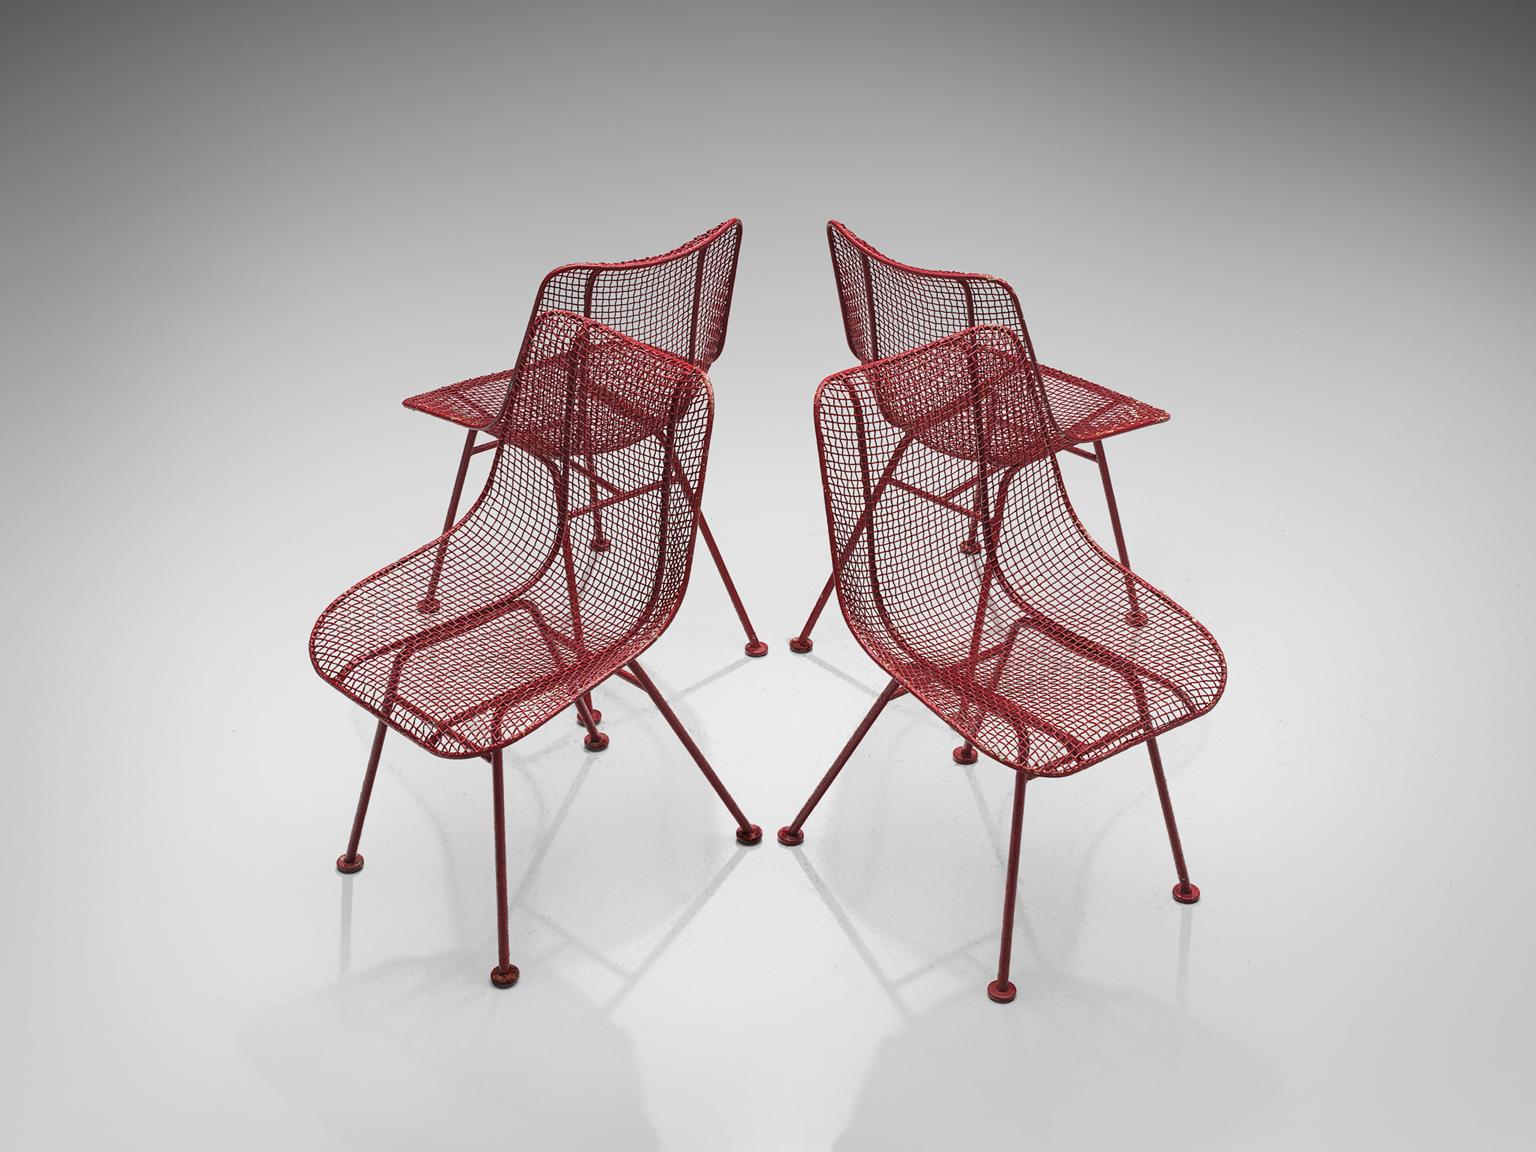 American Russall Woodard 'Sculptura' Set of Four Red Patio Chairs